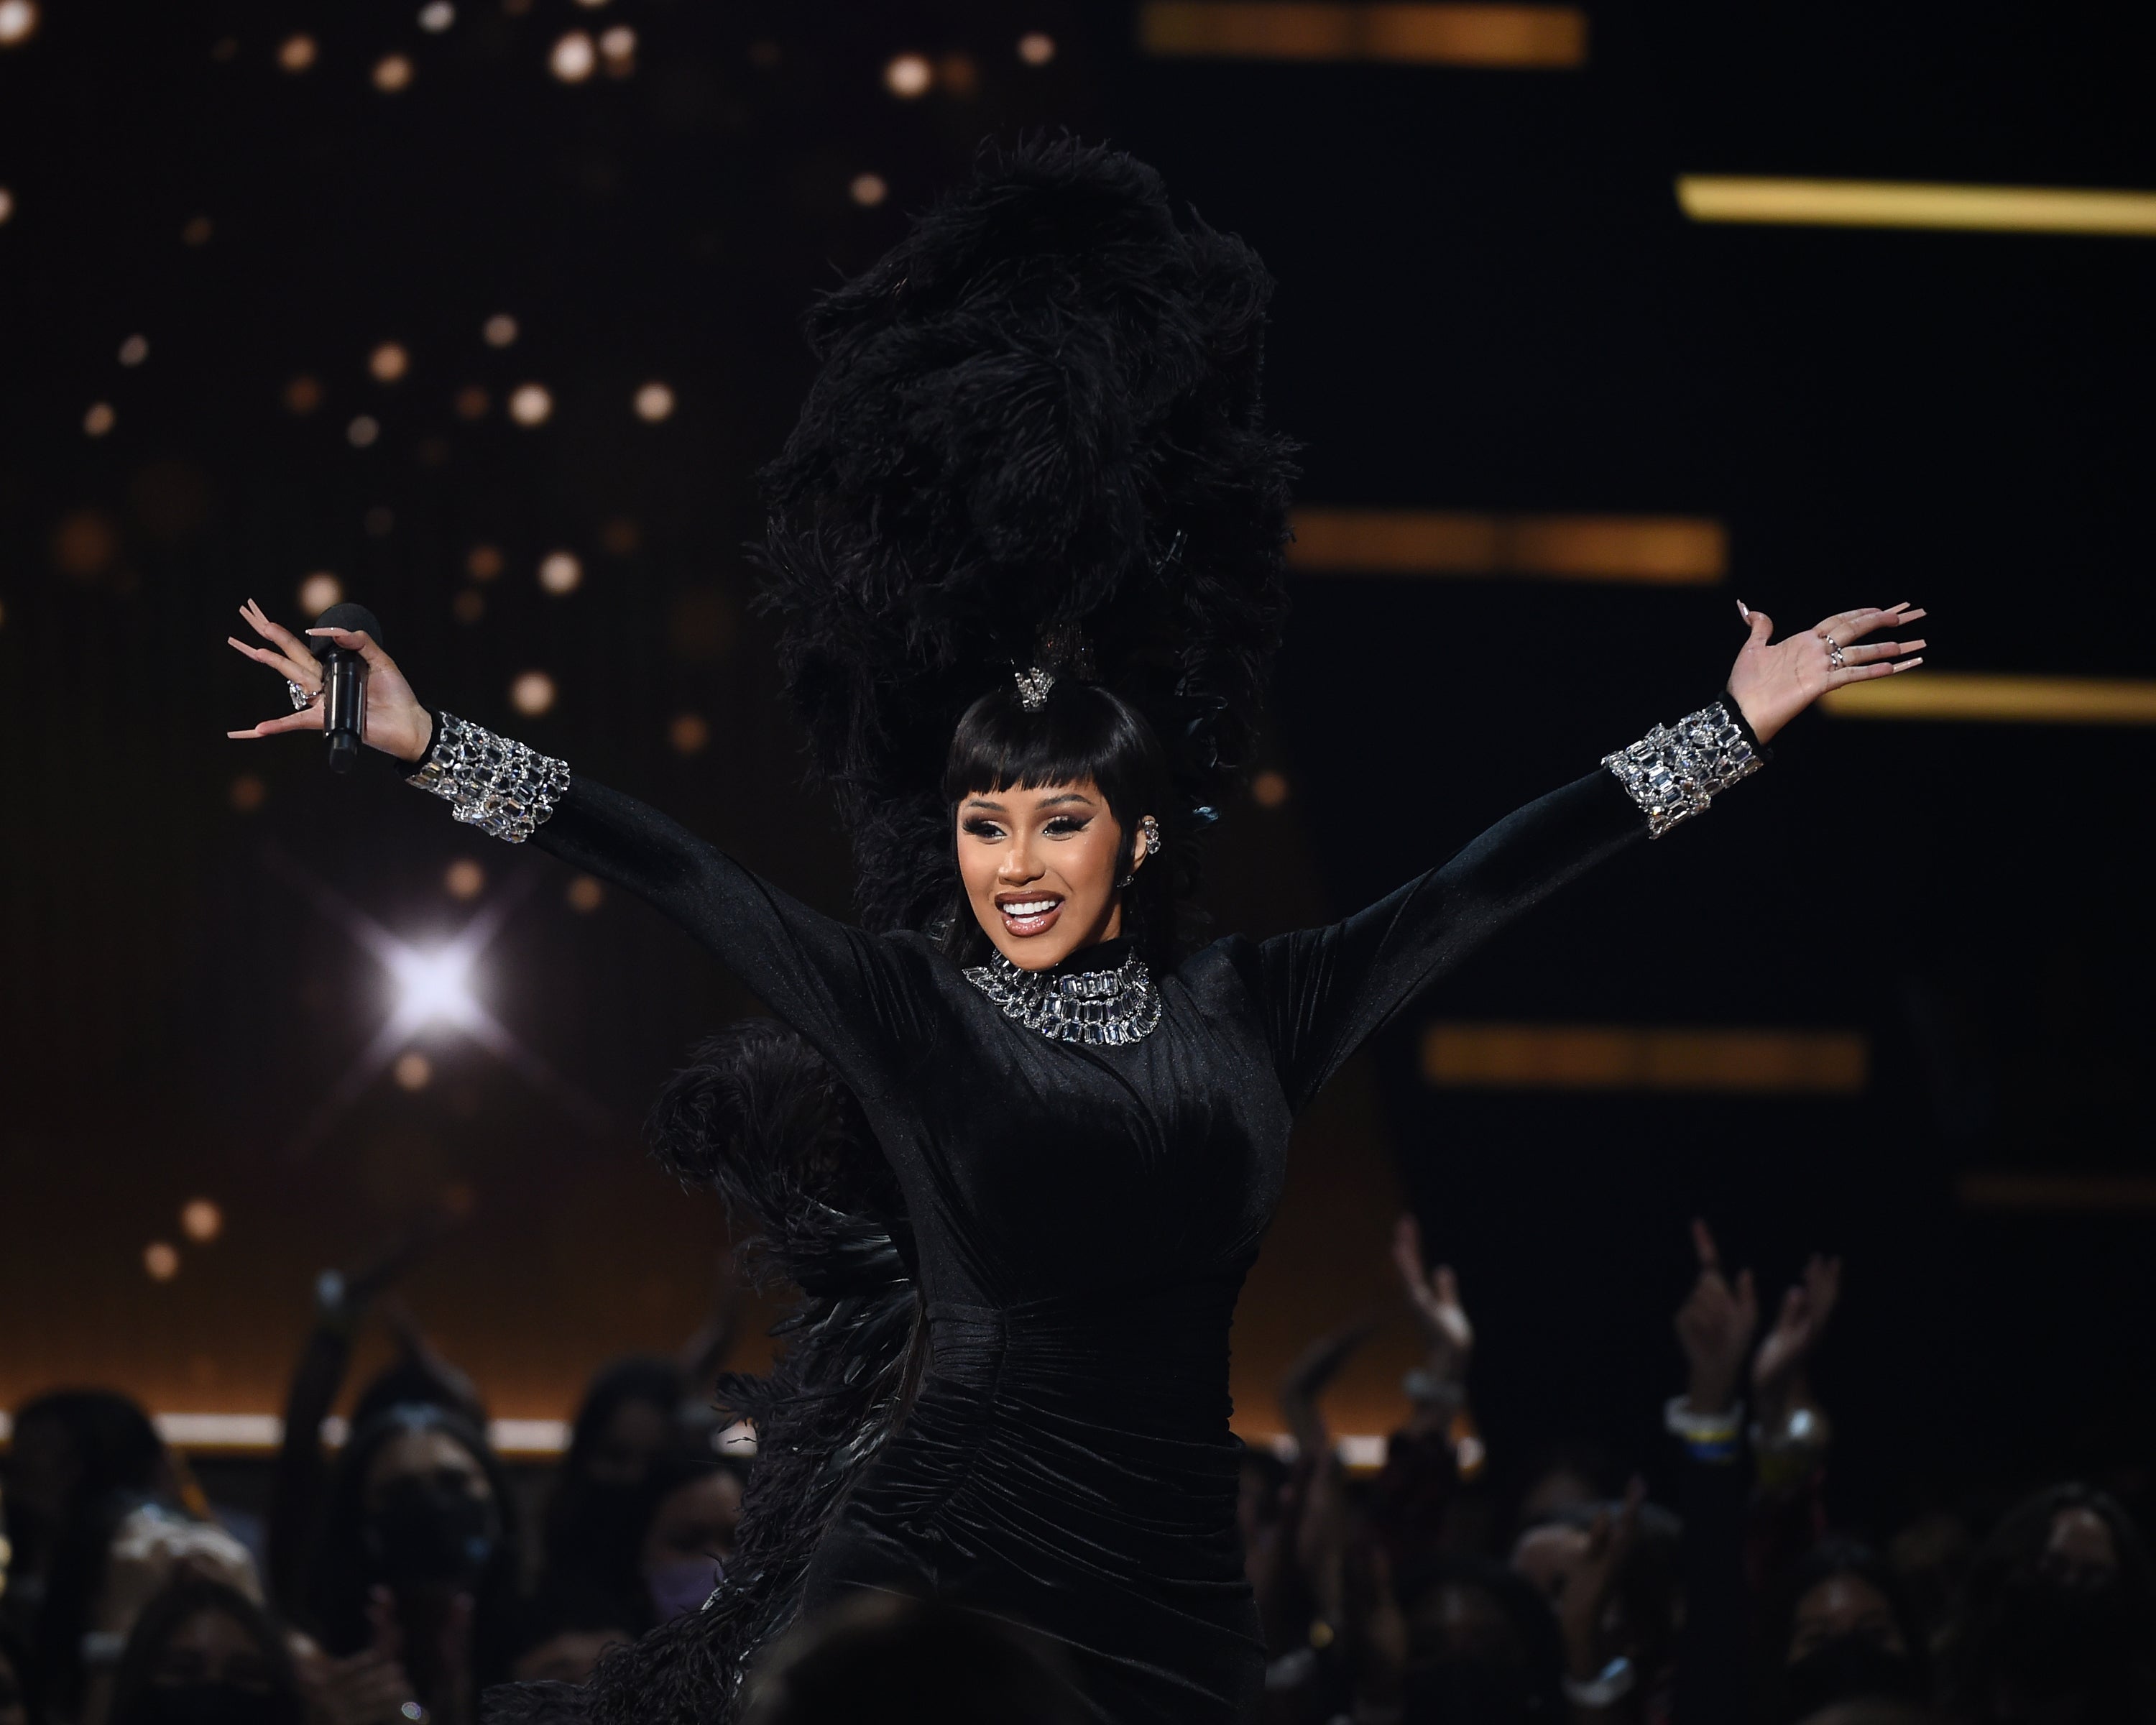 Cardi B performs “I Like It” at this year's American Music Awards